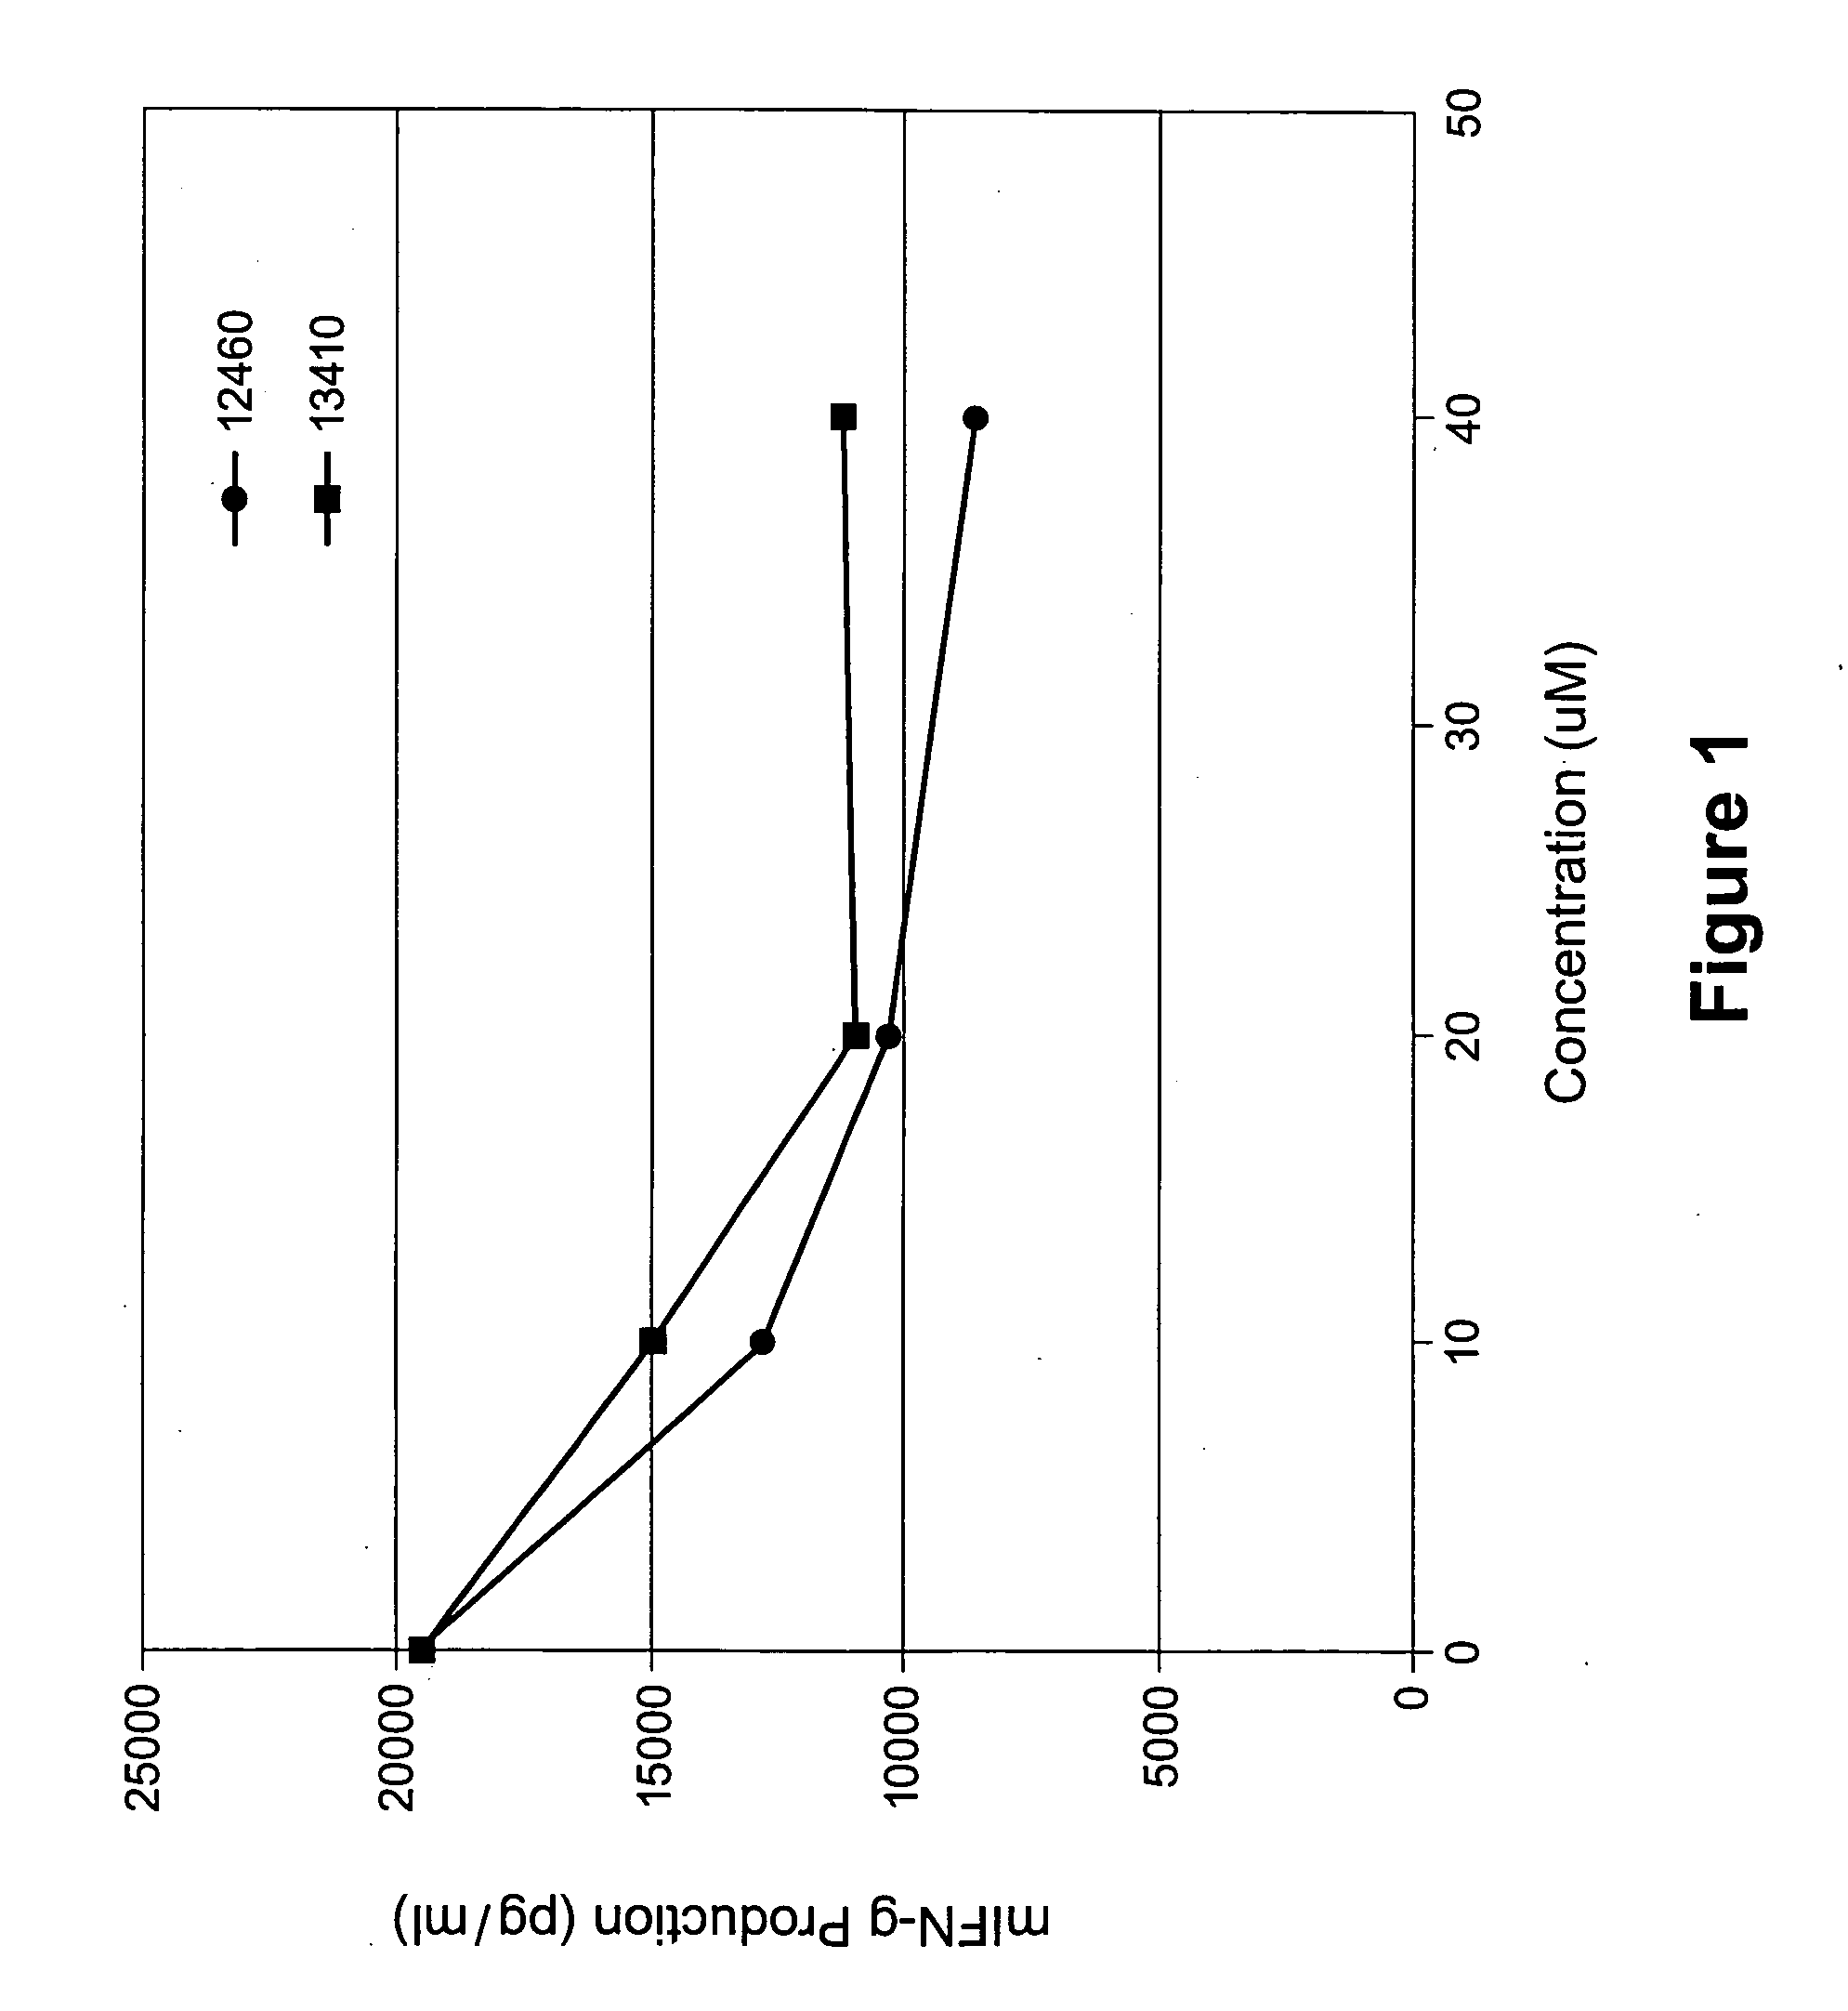 Therapeutic compounds for inhibiting interleukin-12 signaling and methods for using same